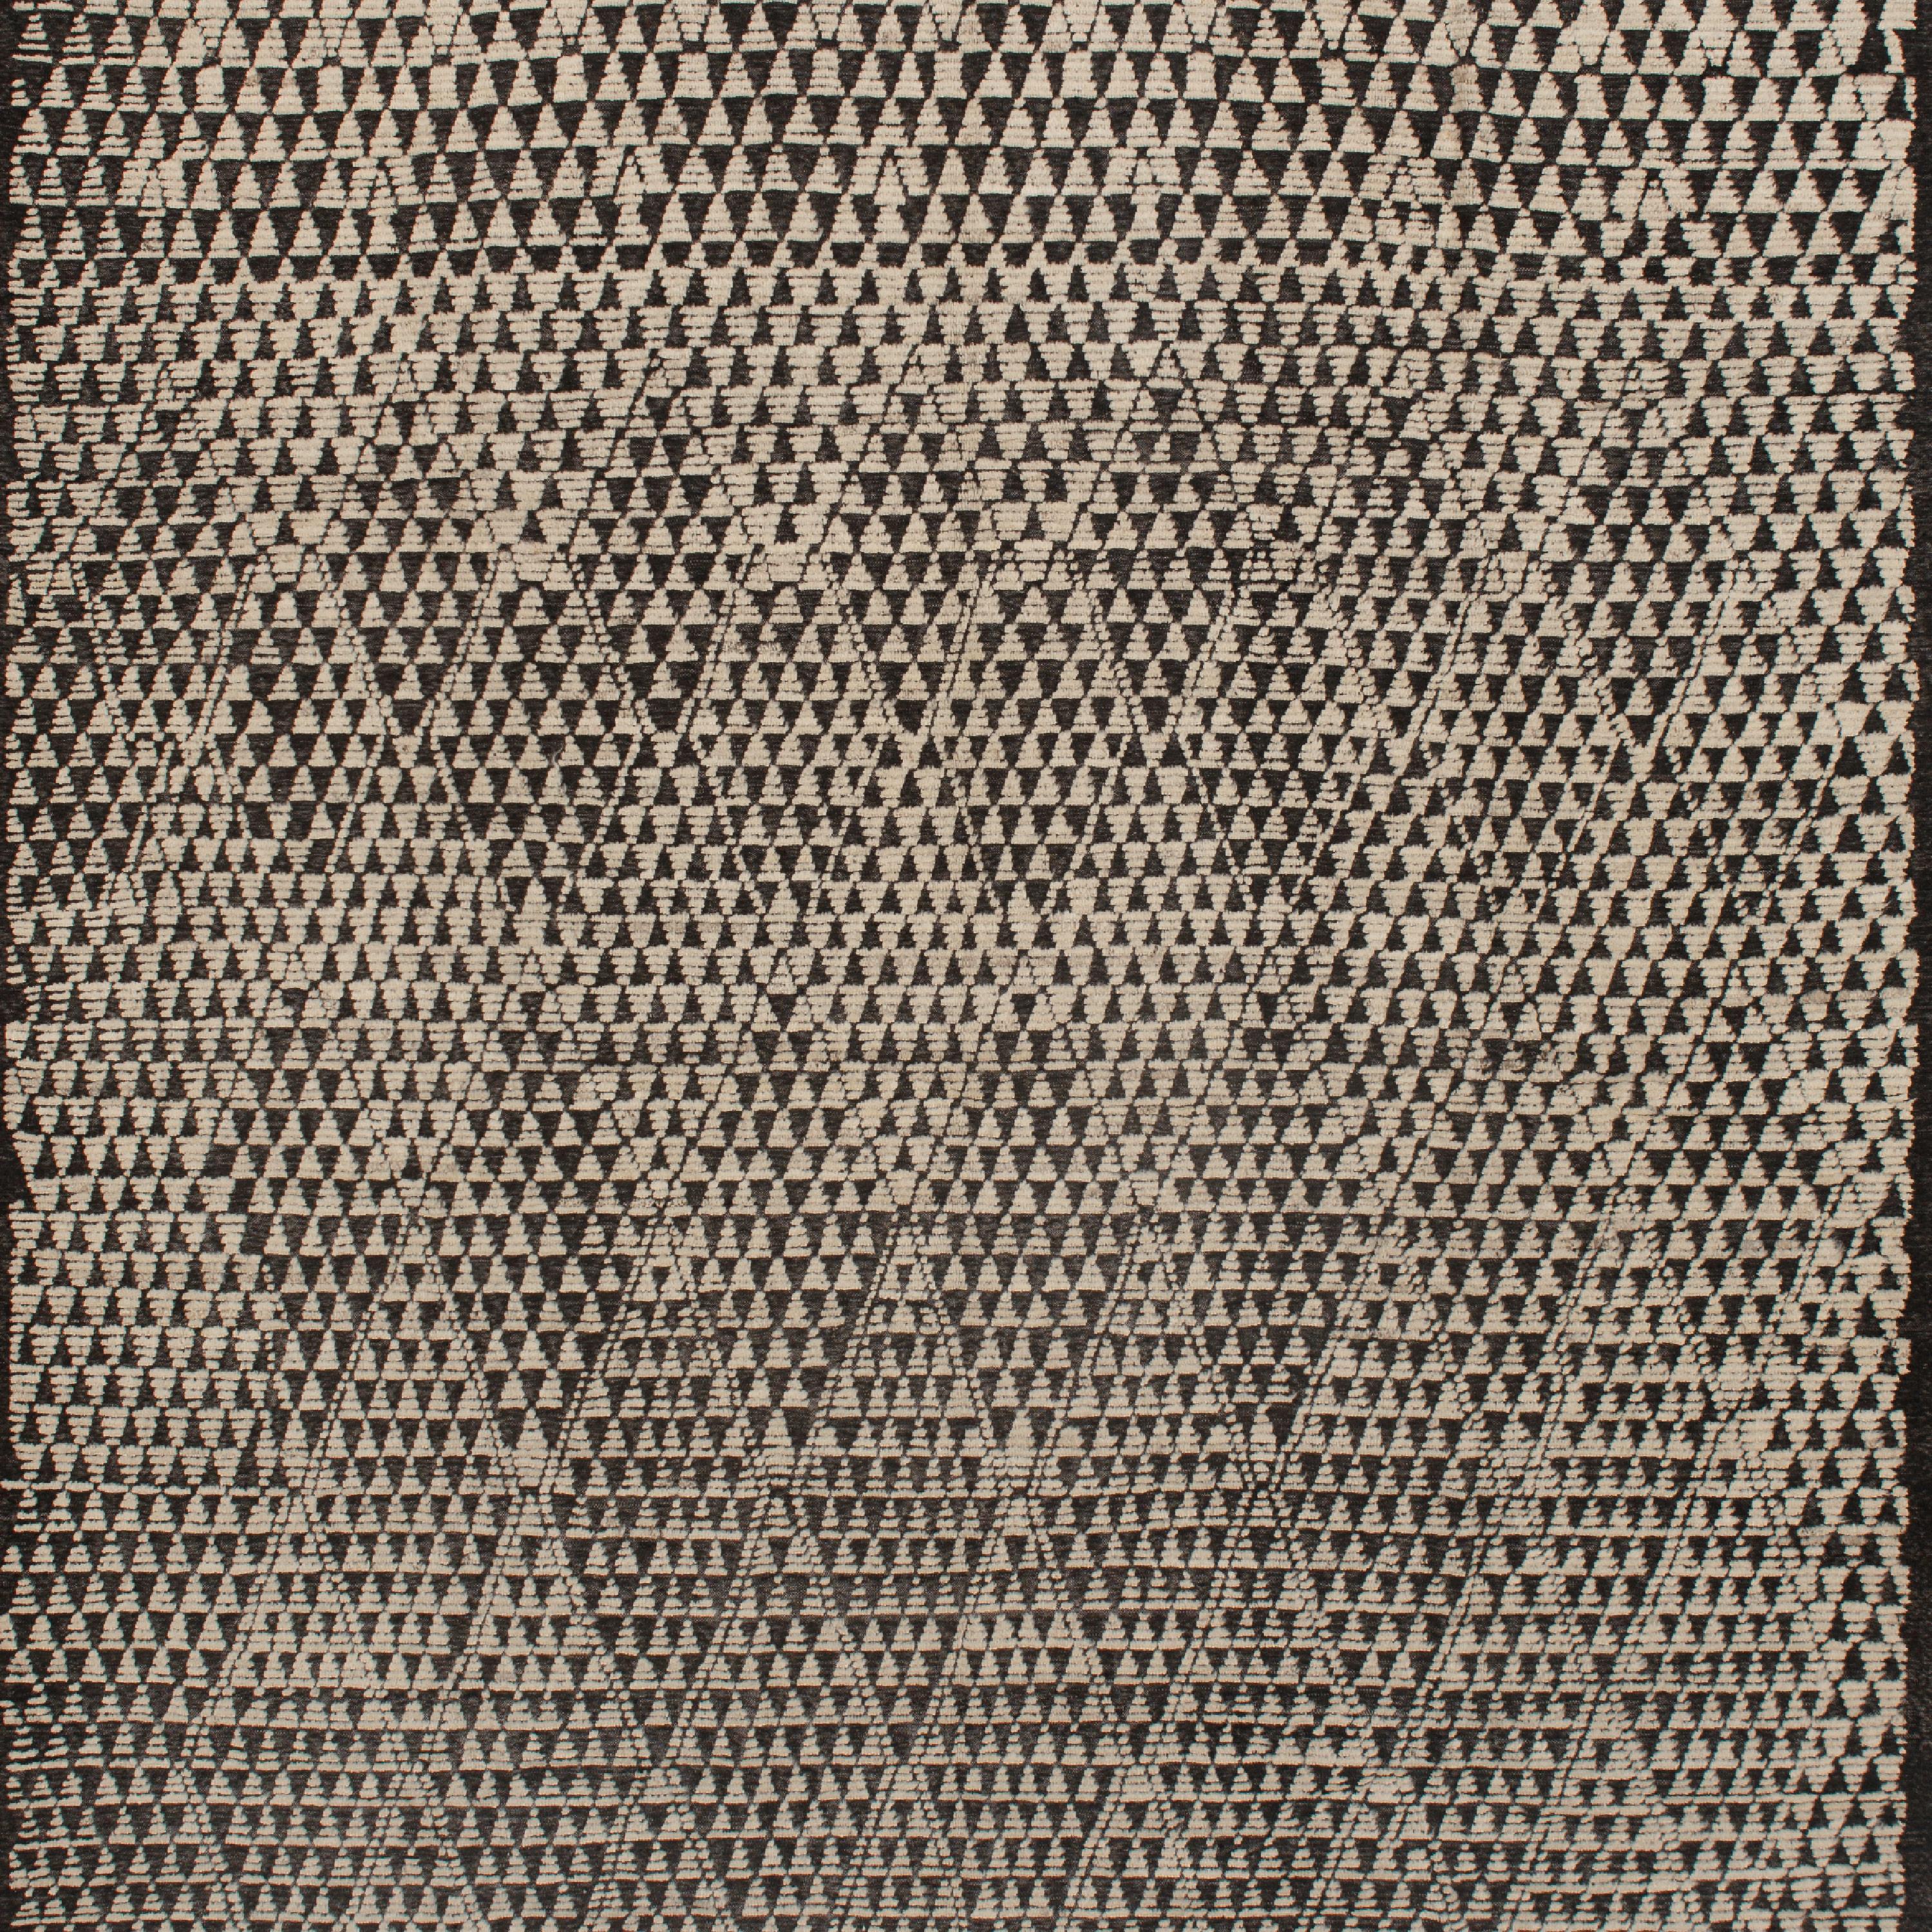 Inspired by the grounding foundations of Earth's natural colors and pure materials, this Zameen Black and White Geometric Wool Rug - 10'6